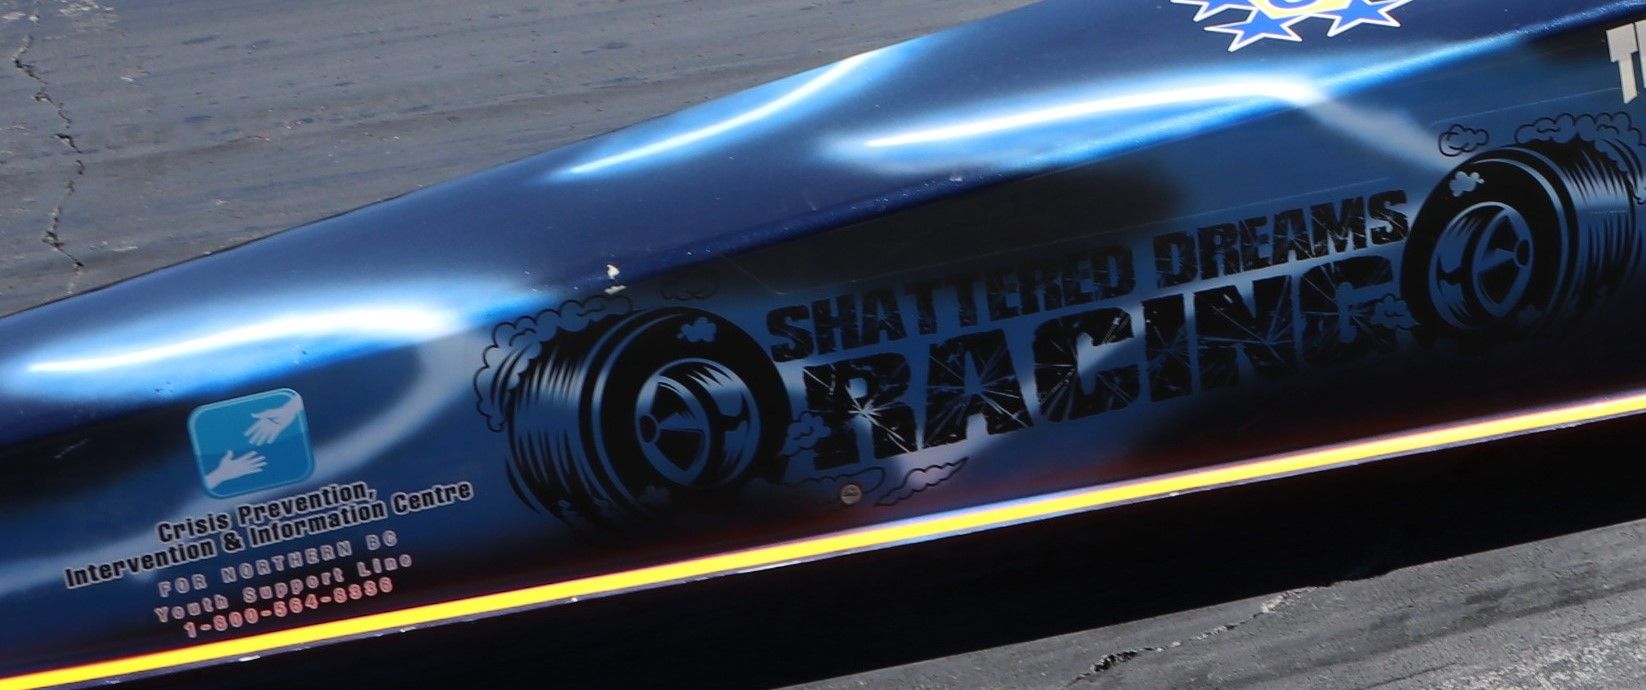 Shattered Dreams Racing Prince George Race Car Highlighting the Crisis Center in Prince George